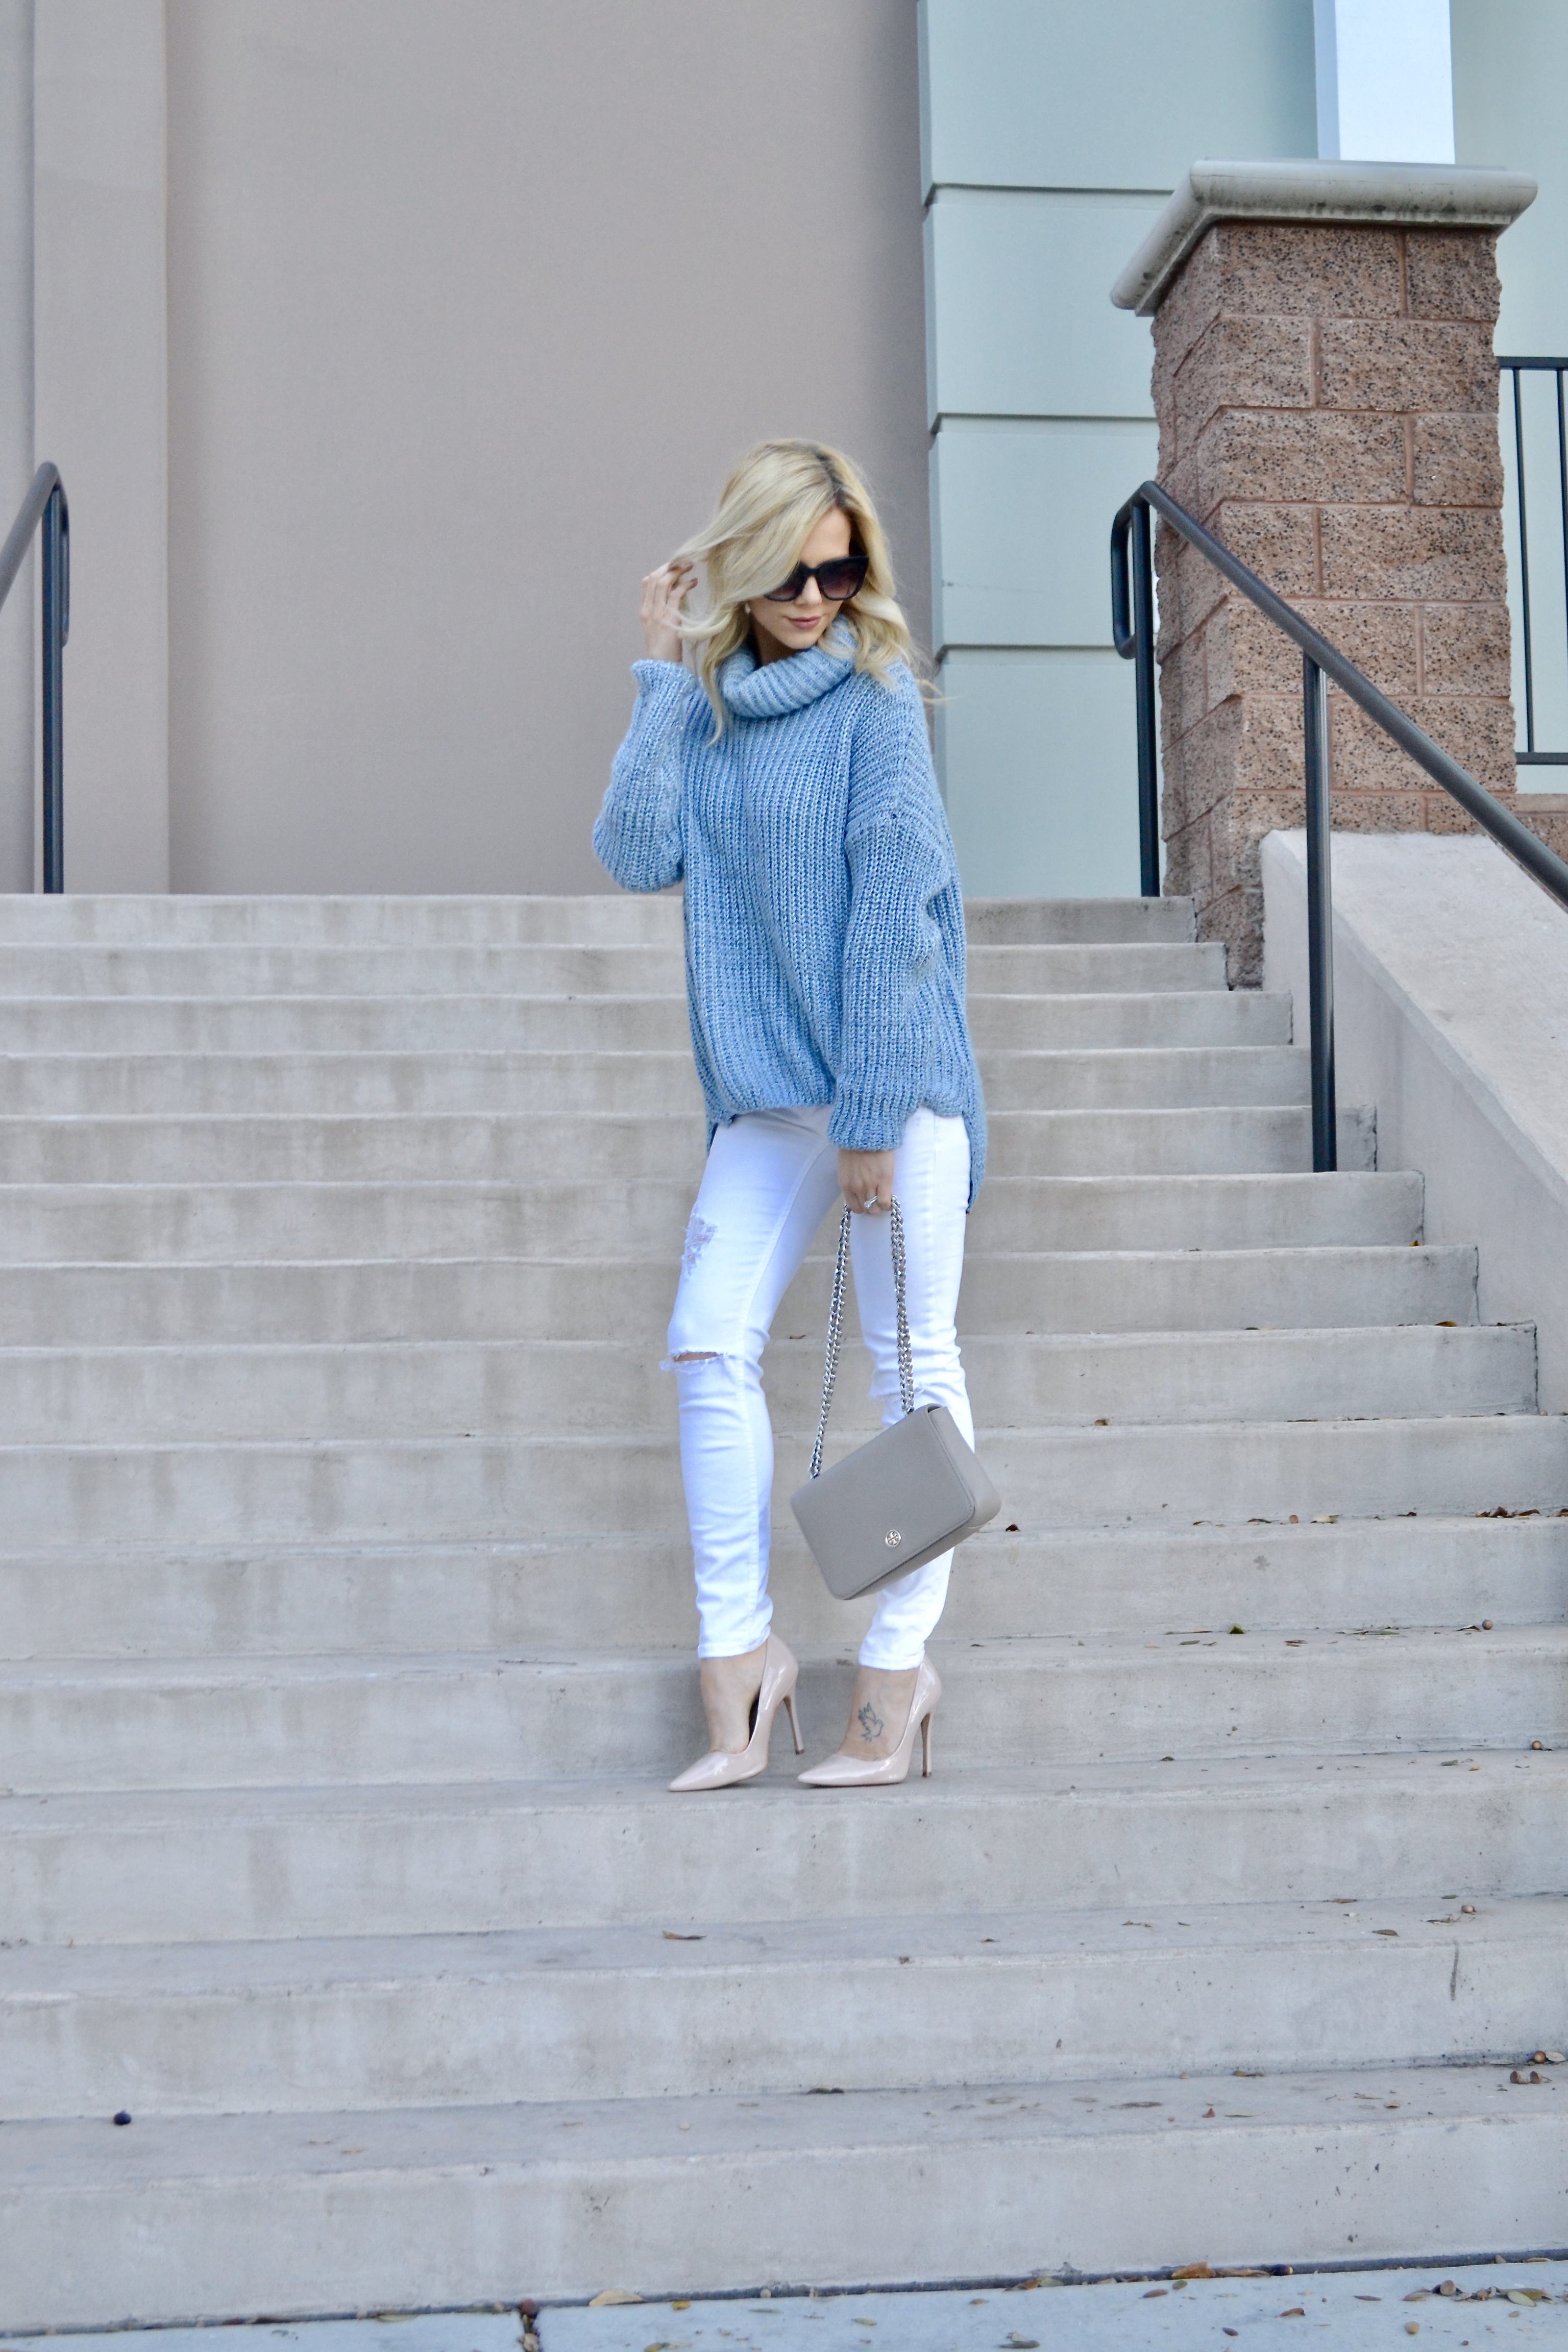 Fashion Blogger Glam Life Living in white jeans, blue sweater, and Tory Burch bag